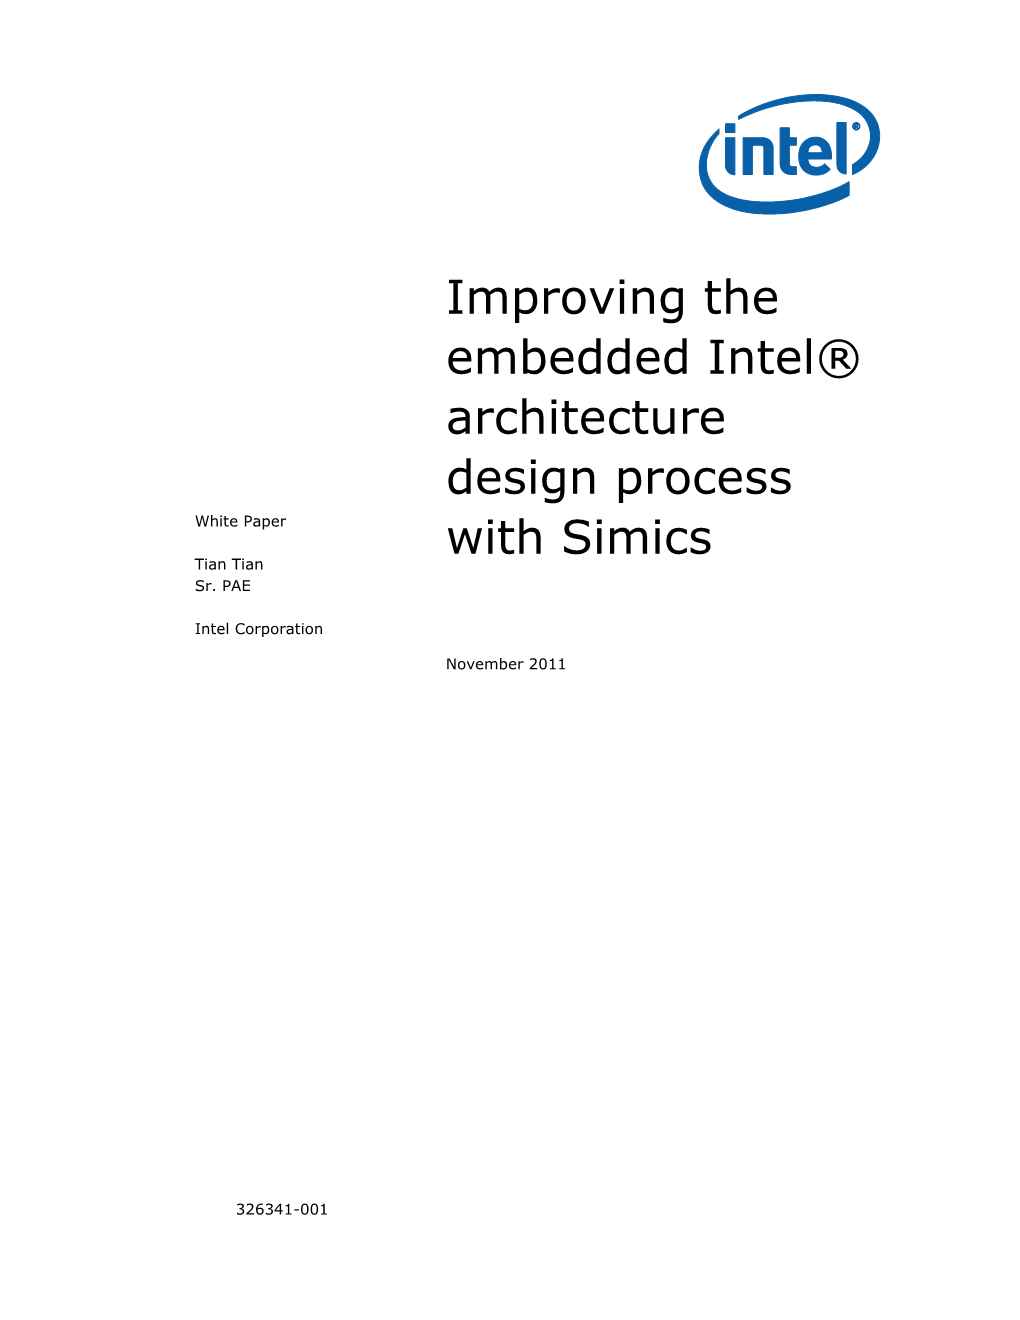 Improving the Embedded Intel® Architecture Design Process with Simics White Paper